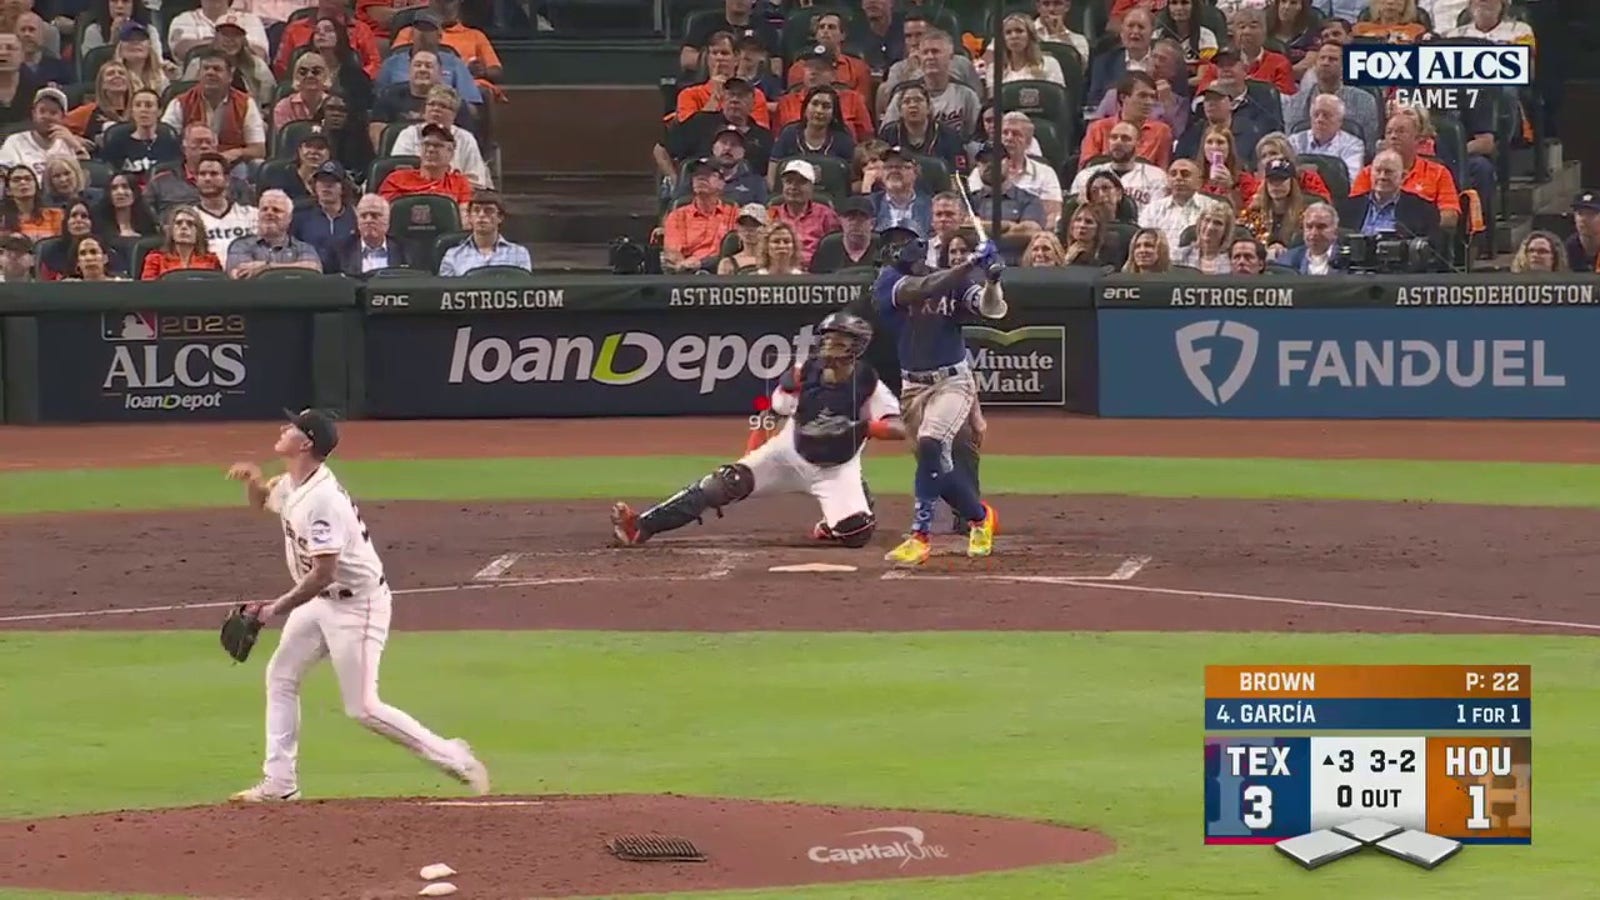 Adolis Garcia smashed a solo home run to extend the Rangers' lead over the Astros